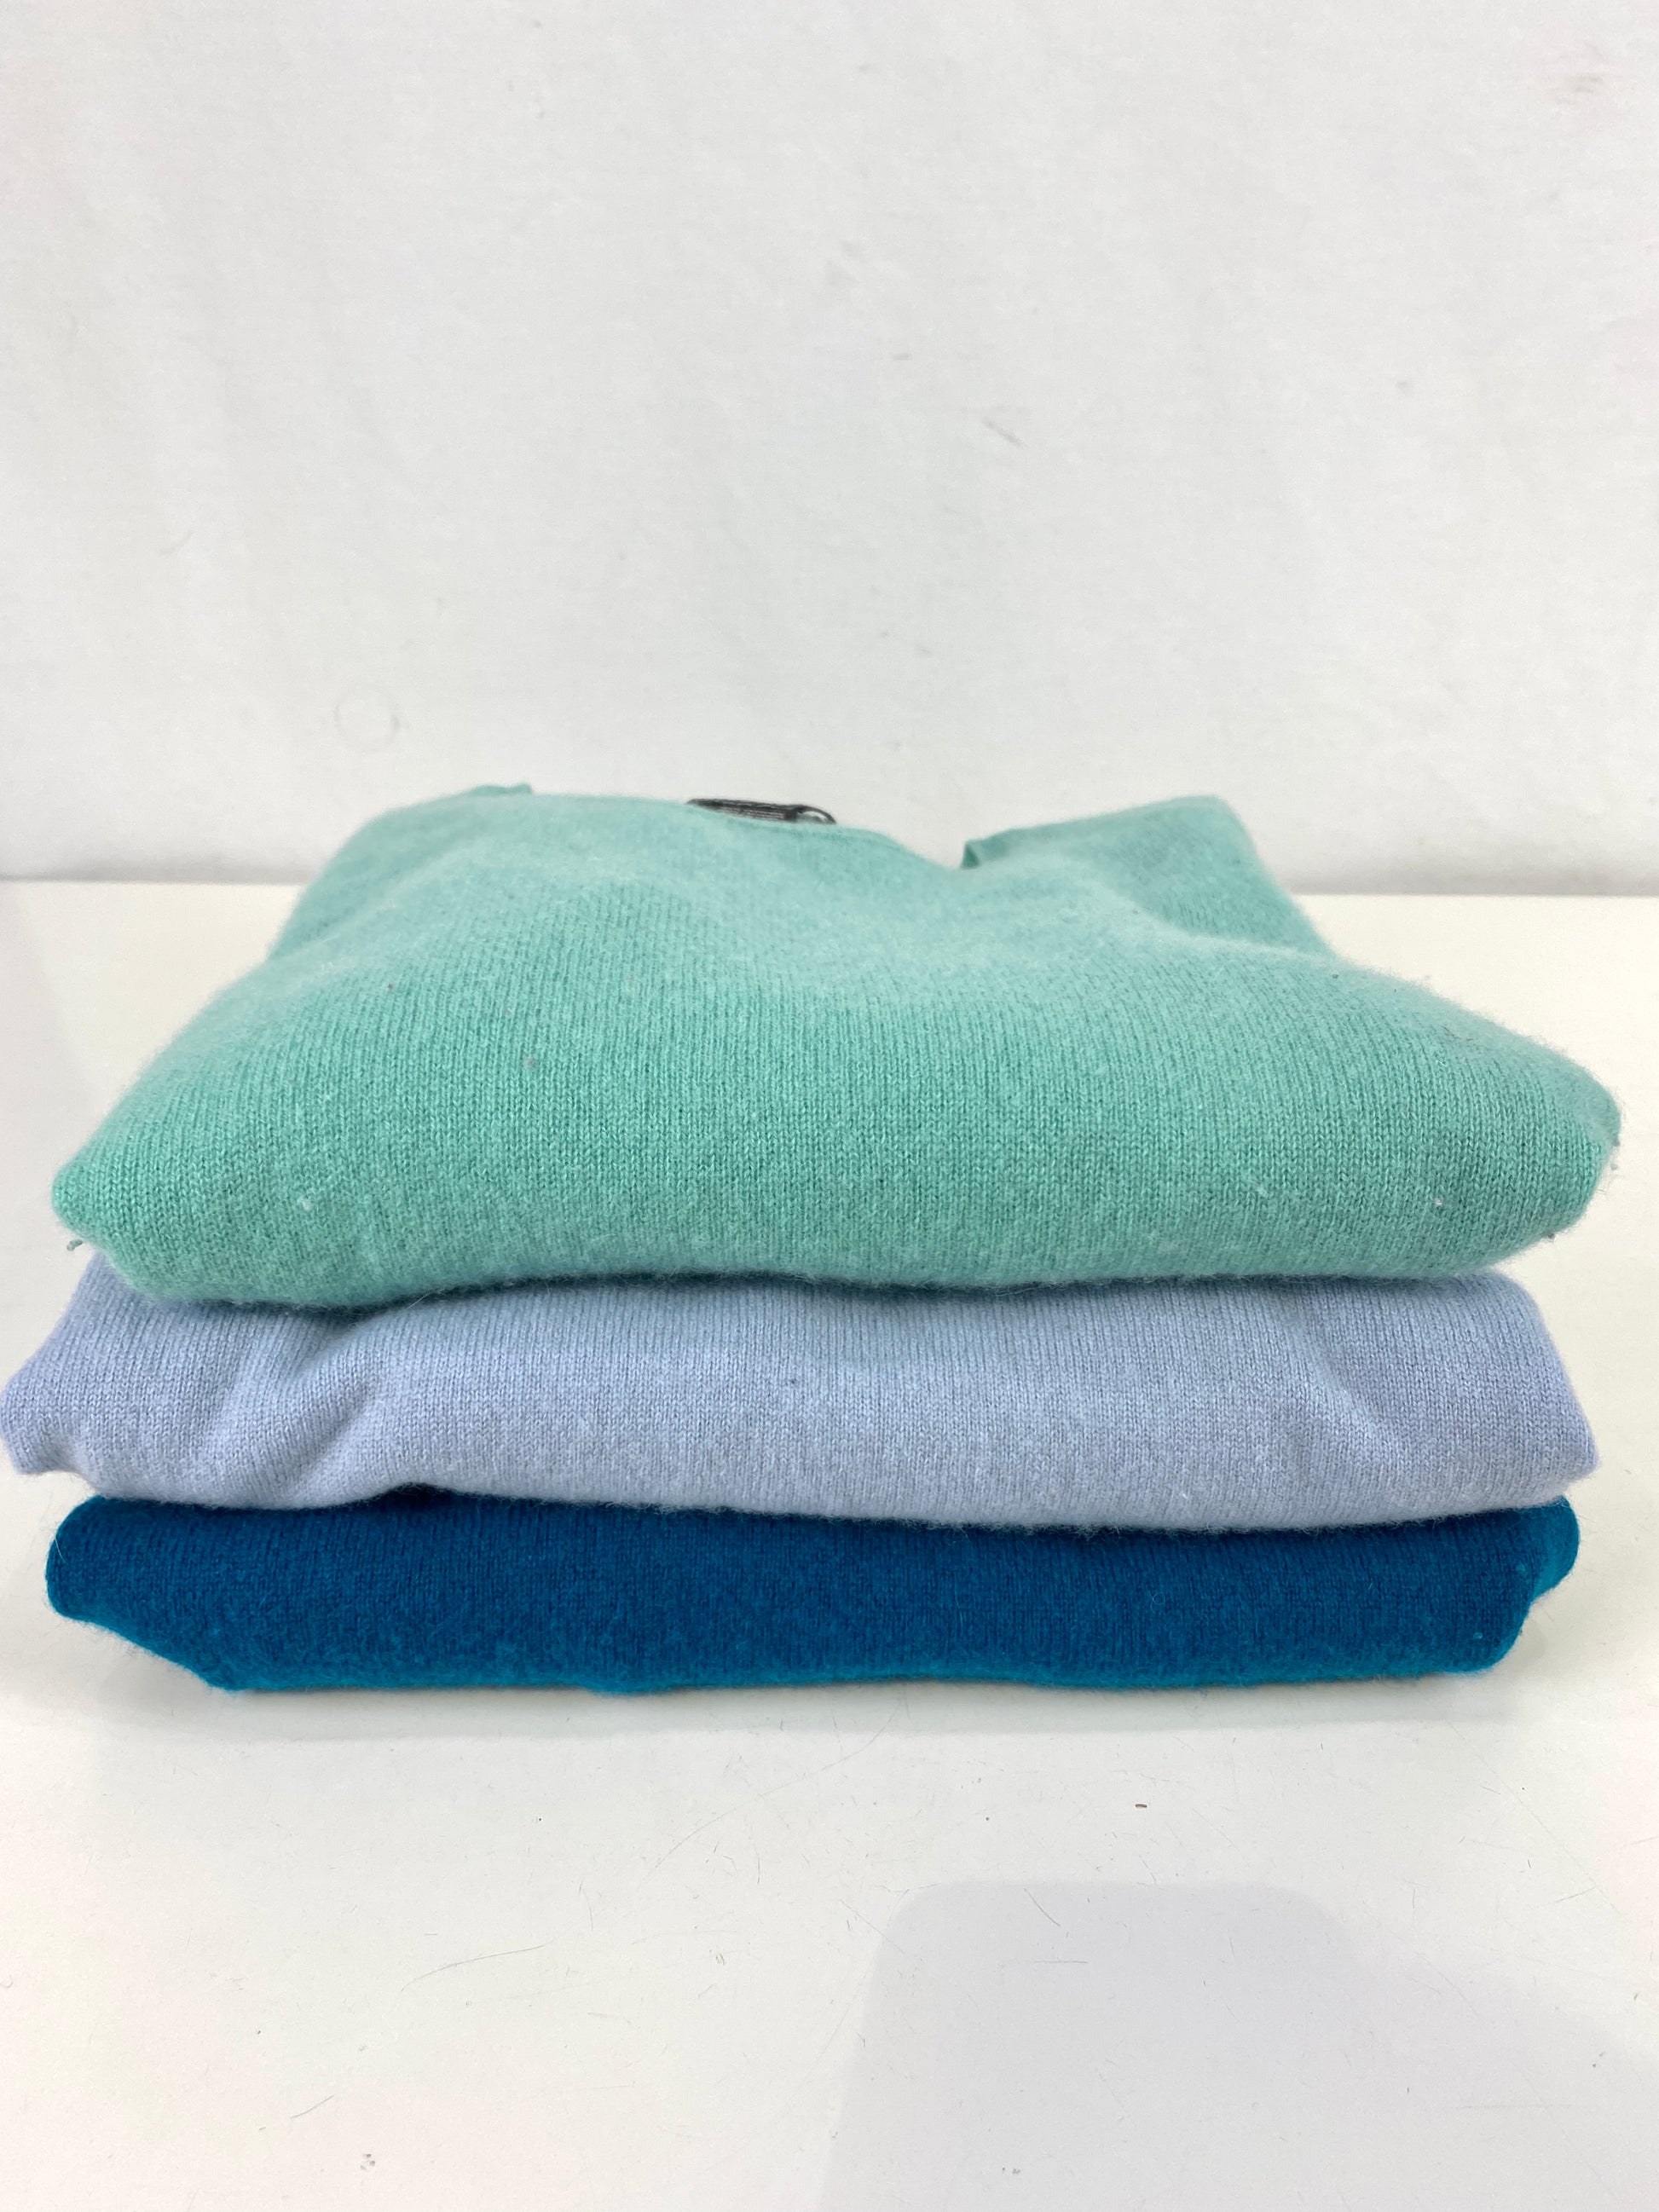 3 blue & green cashmere knits folded in a stack. Ian Drummond Vintage. 